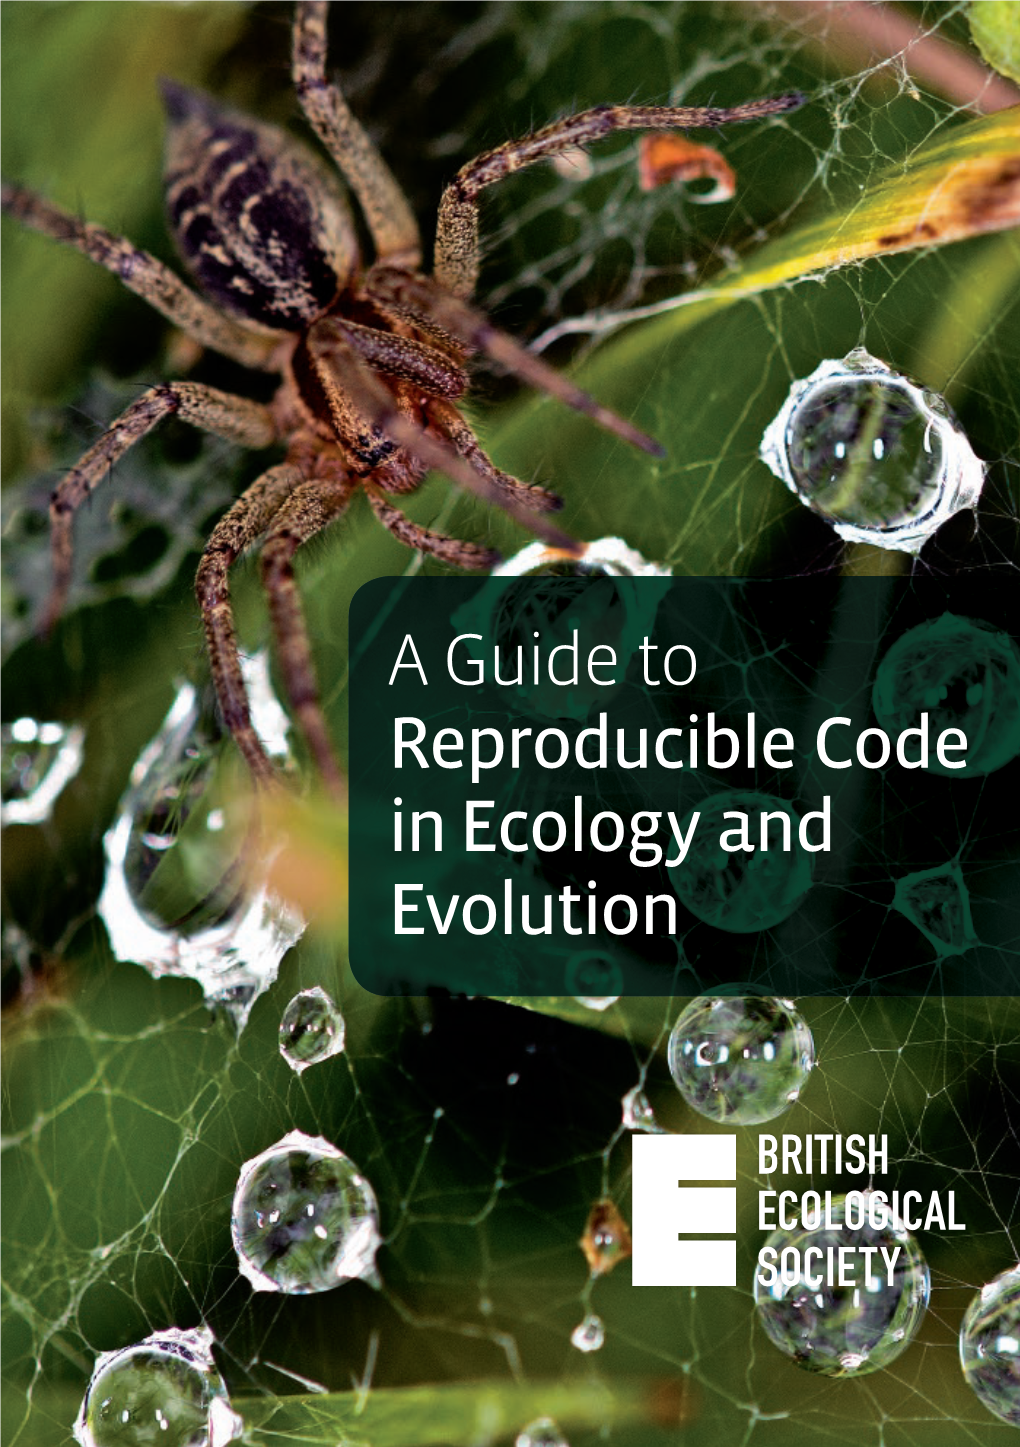 A Guide to Reproducible Code in Ecology and Evolution